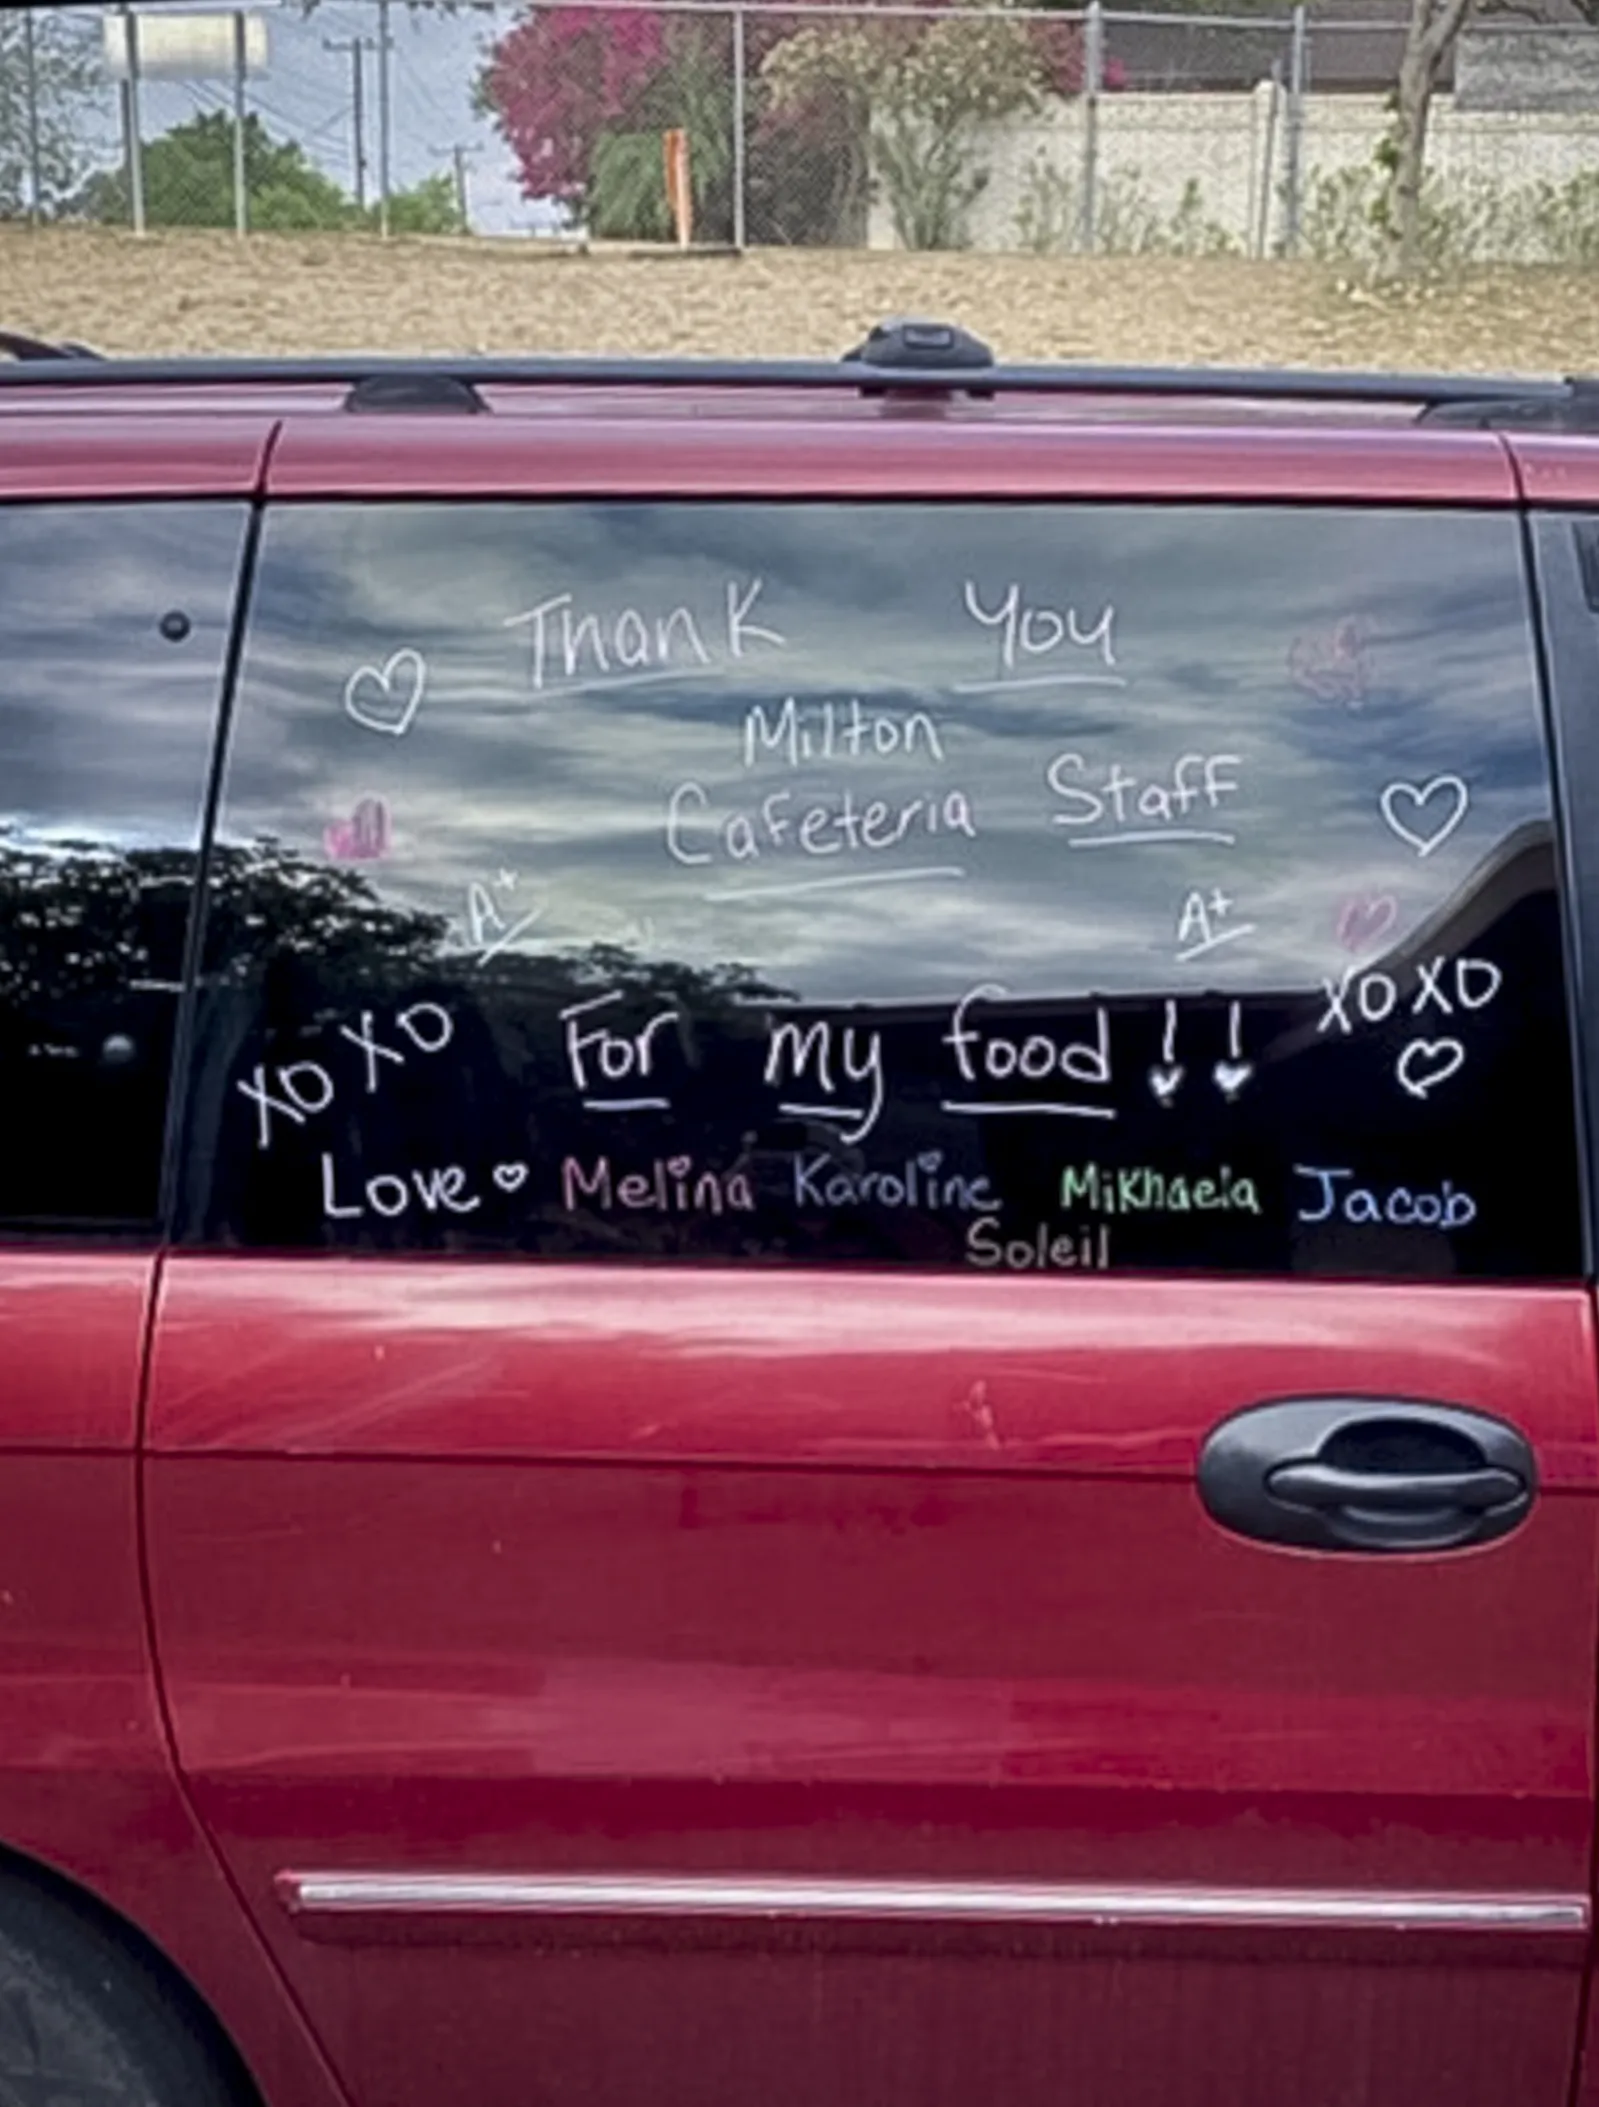 A car window has thank you notes written on it from a family. "Thank you for my food."